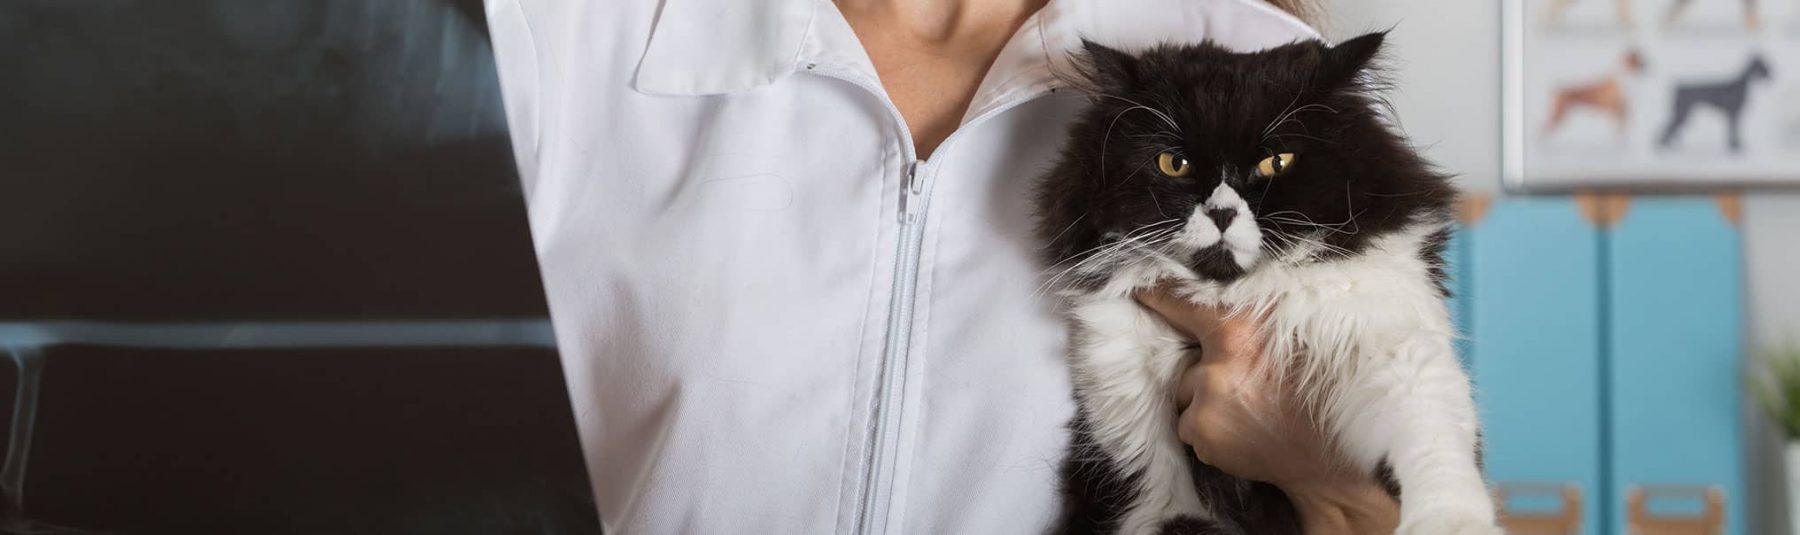 Veterinarian holding a black and white cat